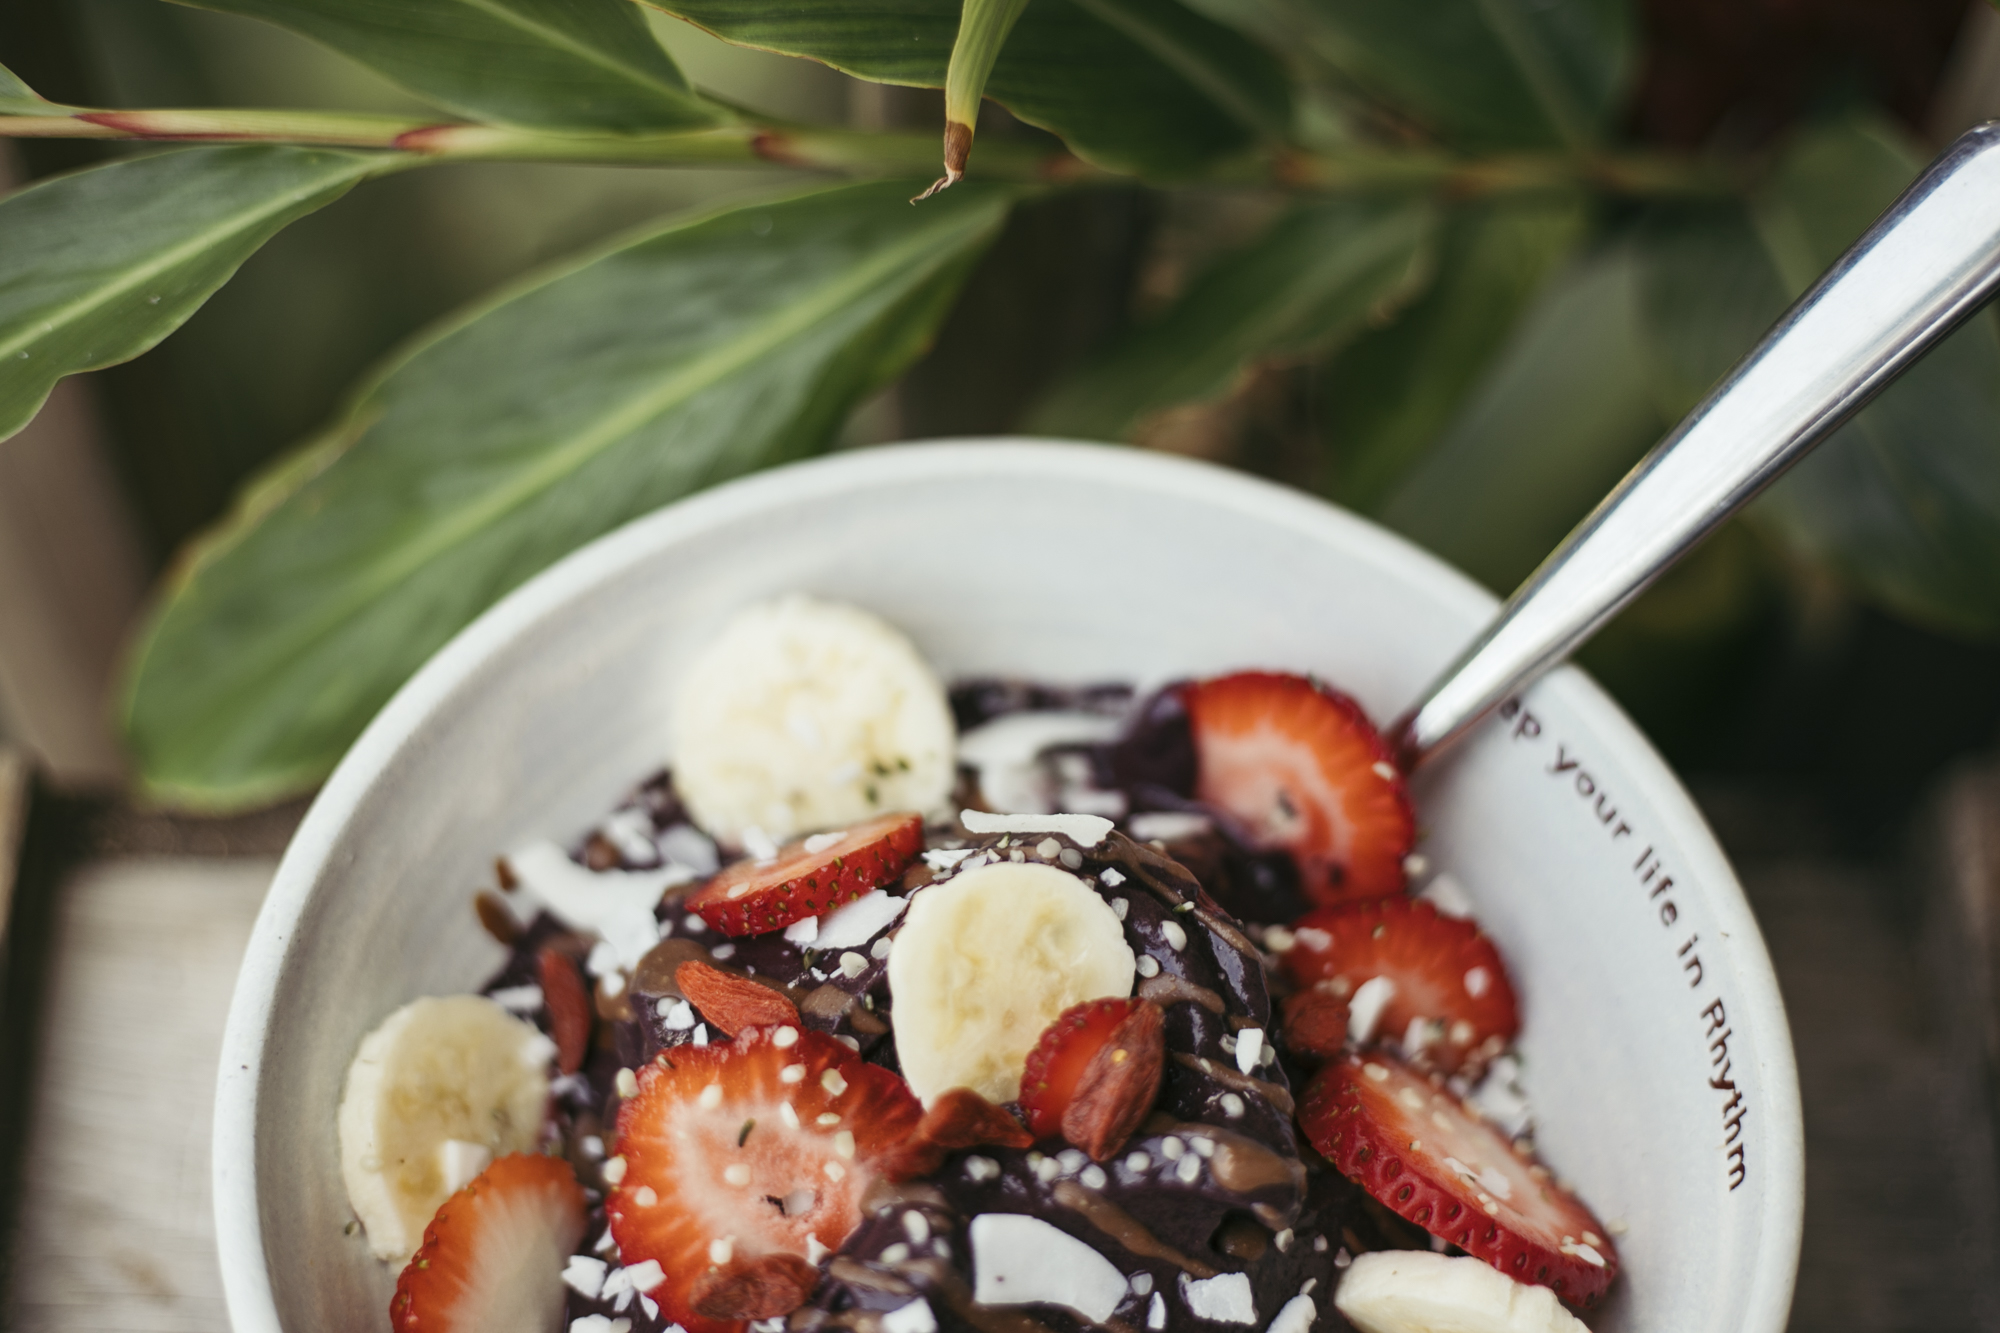 ACAI BOWLS – A COMPLETE GUIDE TO CONSISTENCY AND TEXTURE